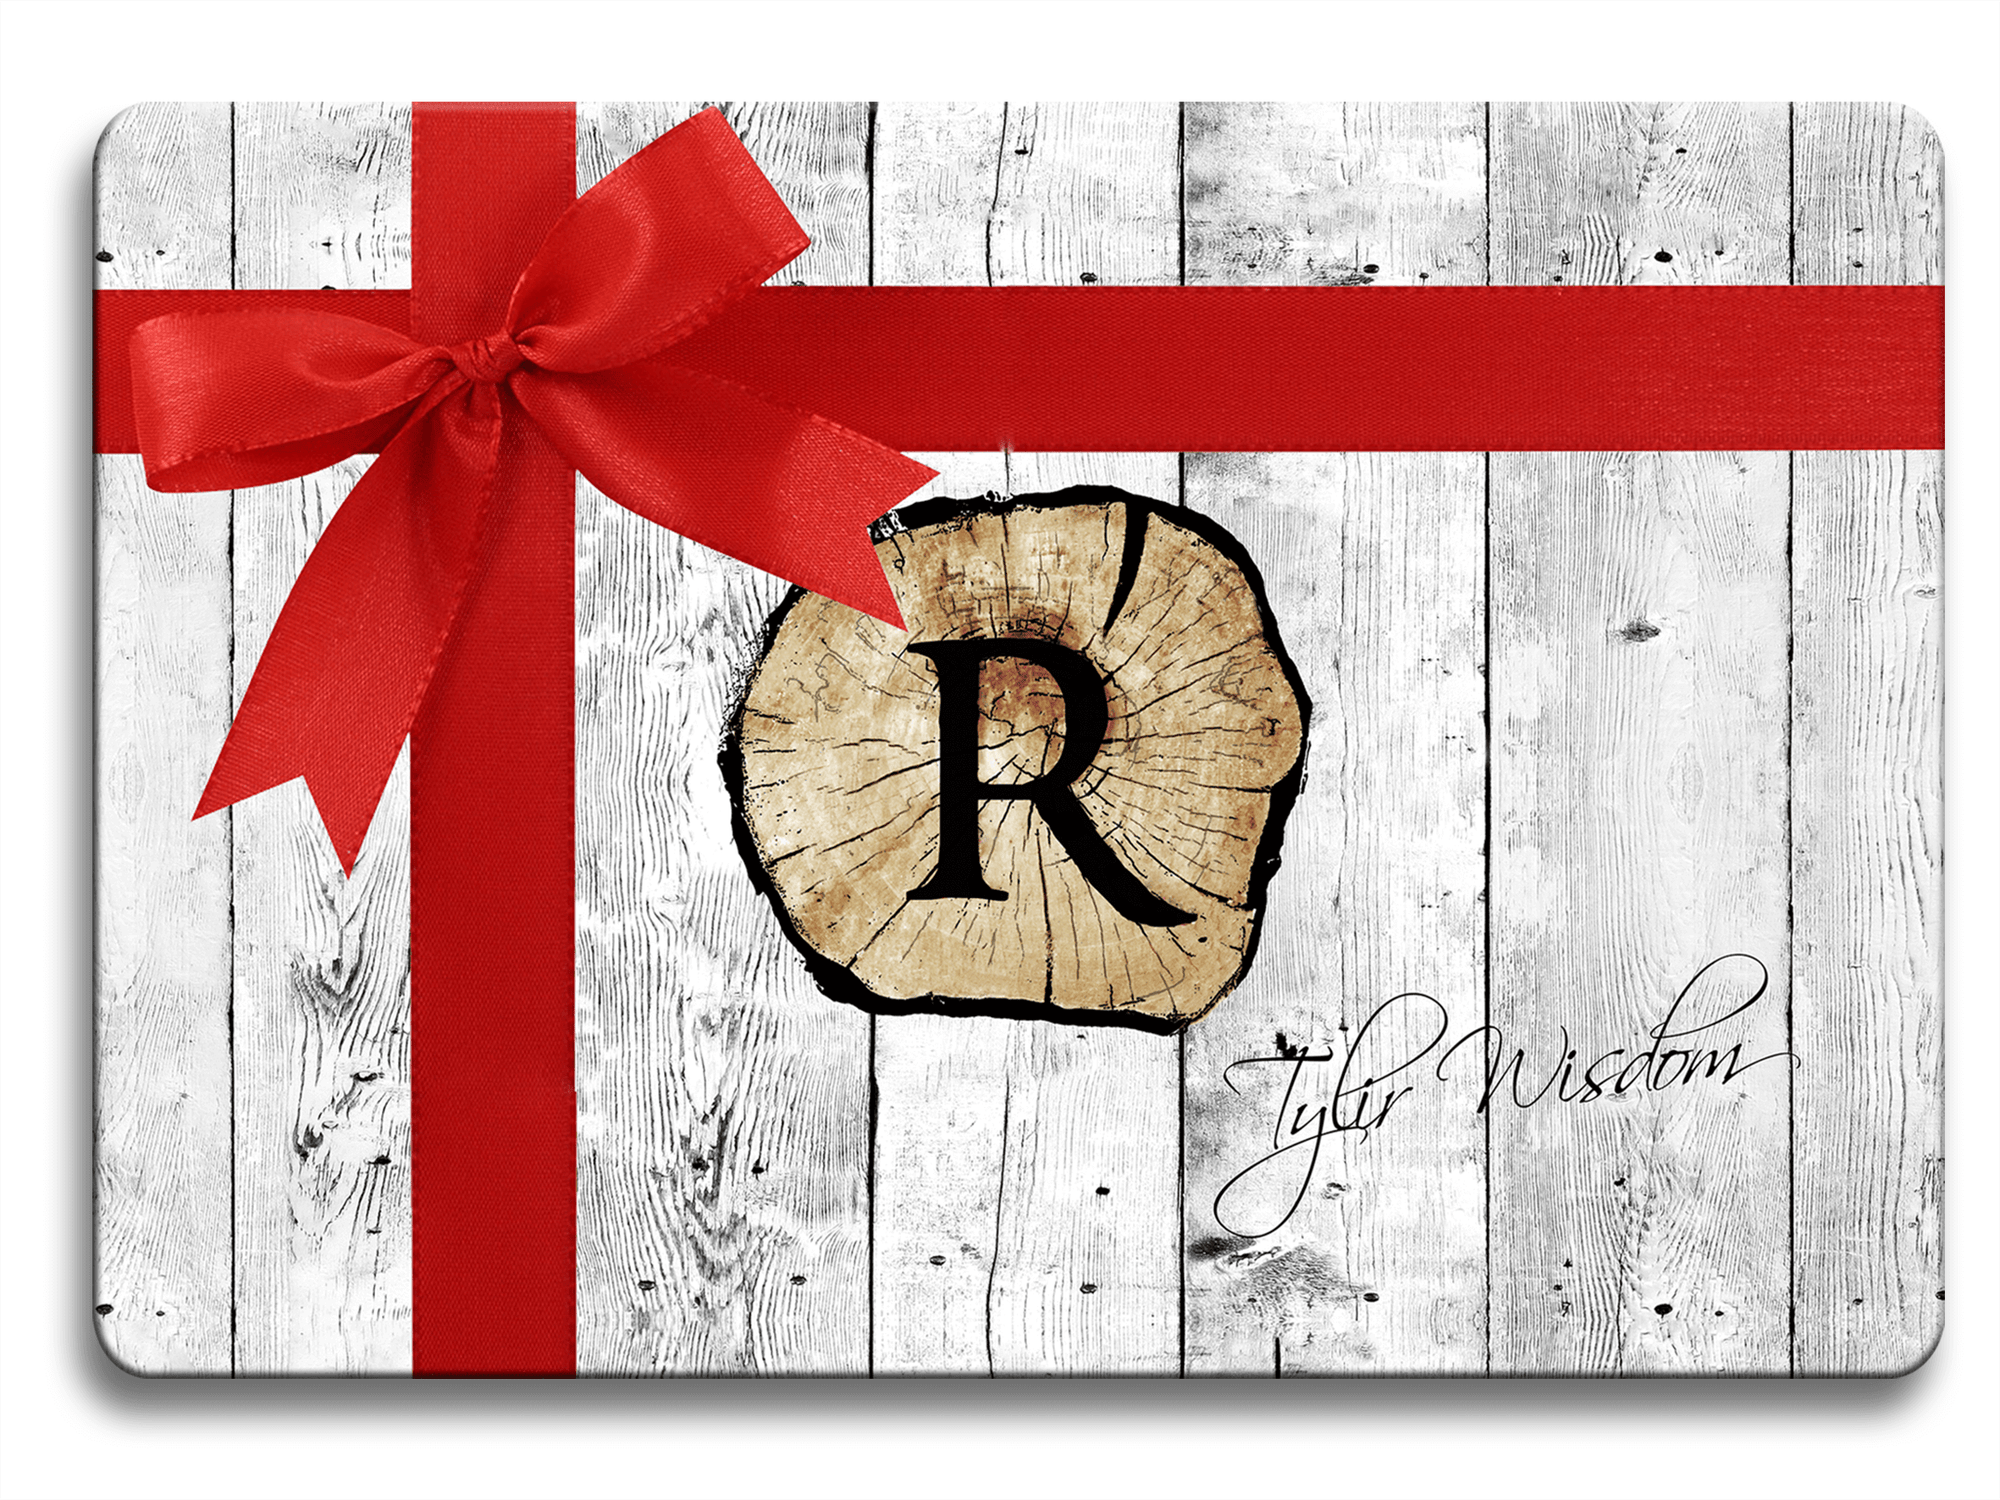 Get the perfect gift for any occasion with Rustic Engravings gift cards. Perfect for last minute shopping, choose from a wide selection of customizable and unique items. Give the gift of quality craftsmanship today